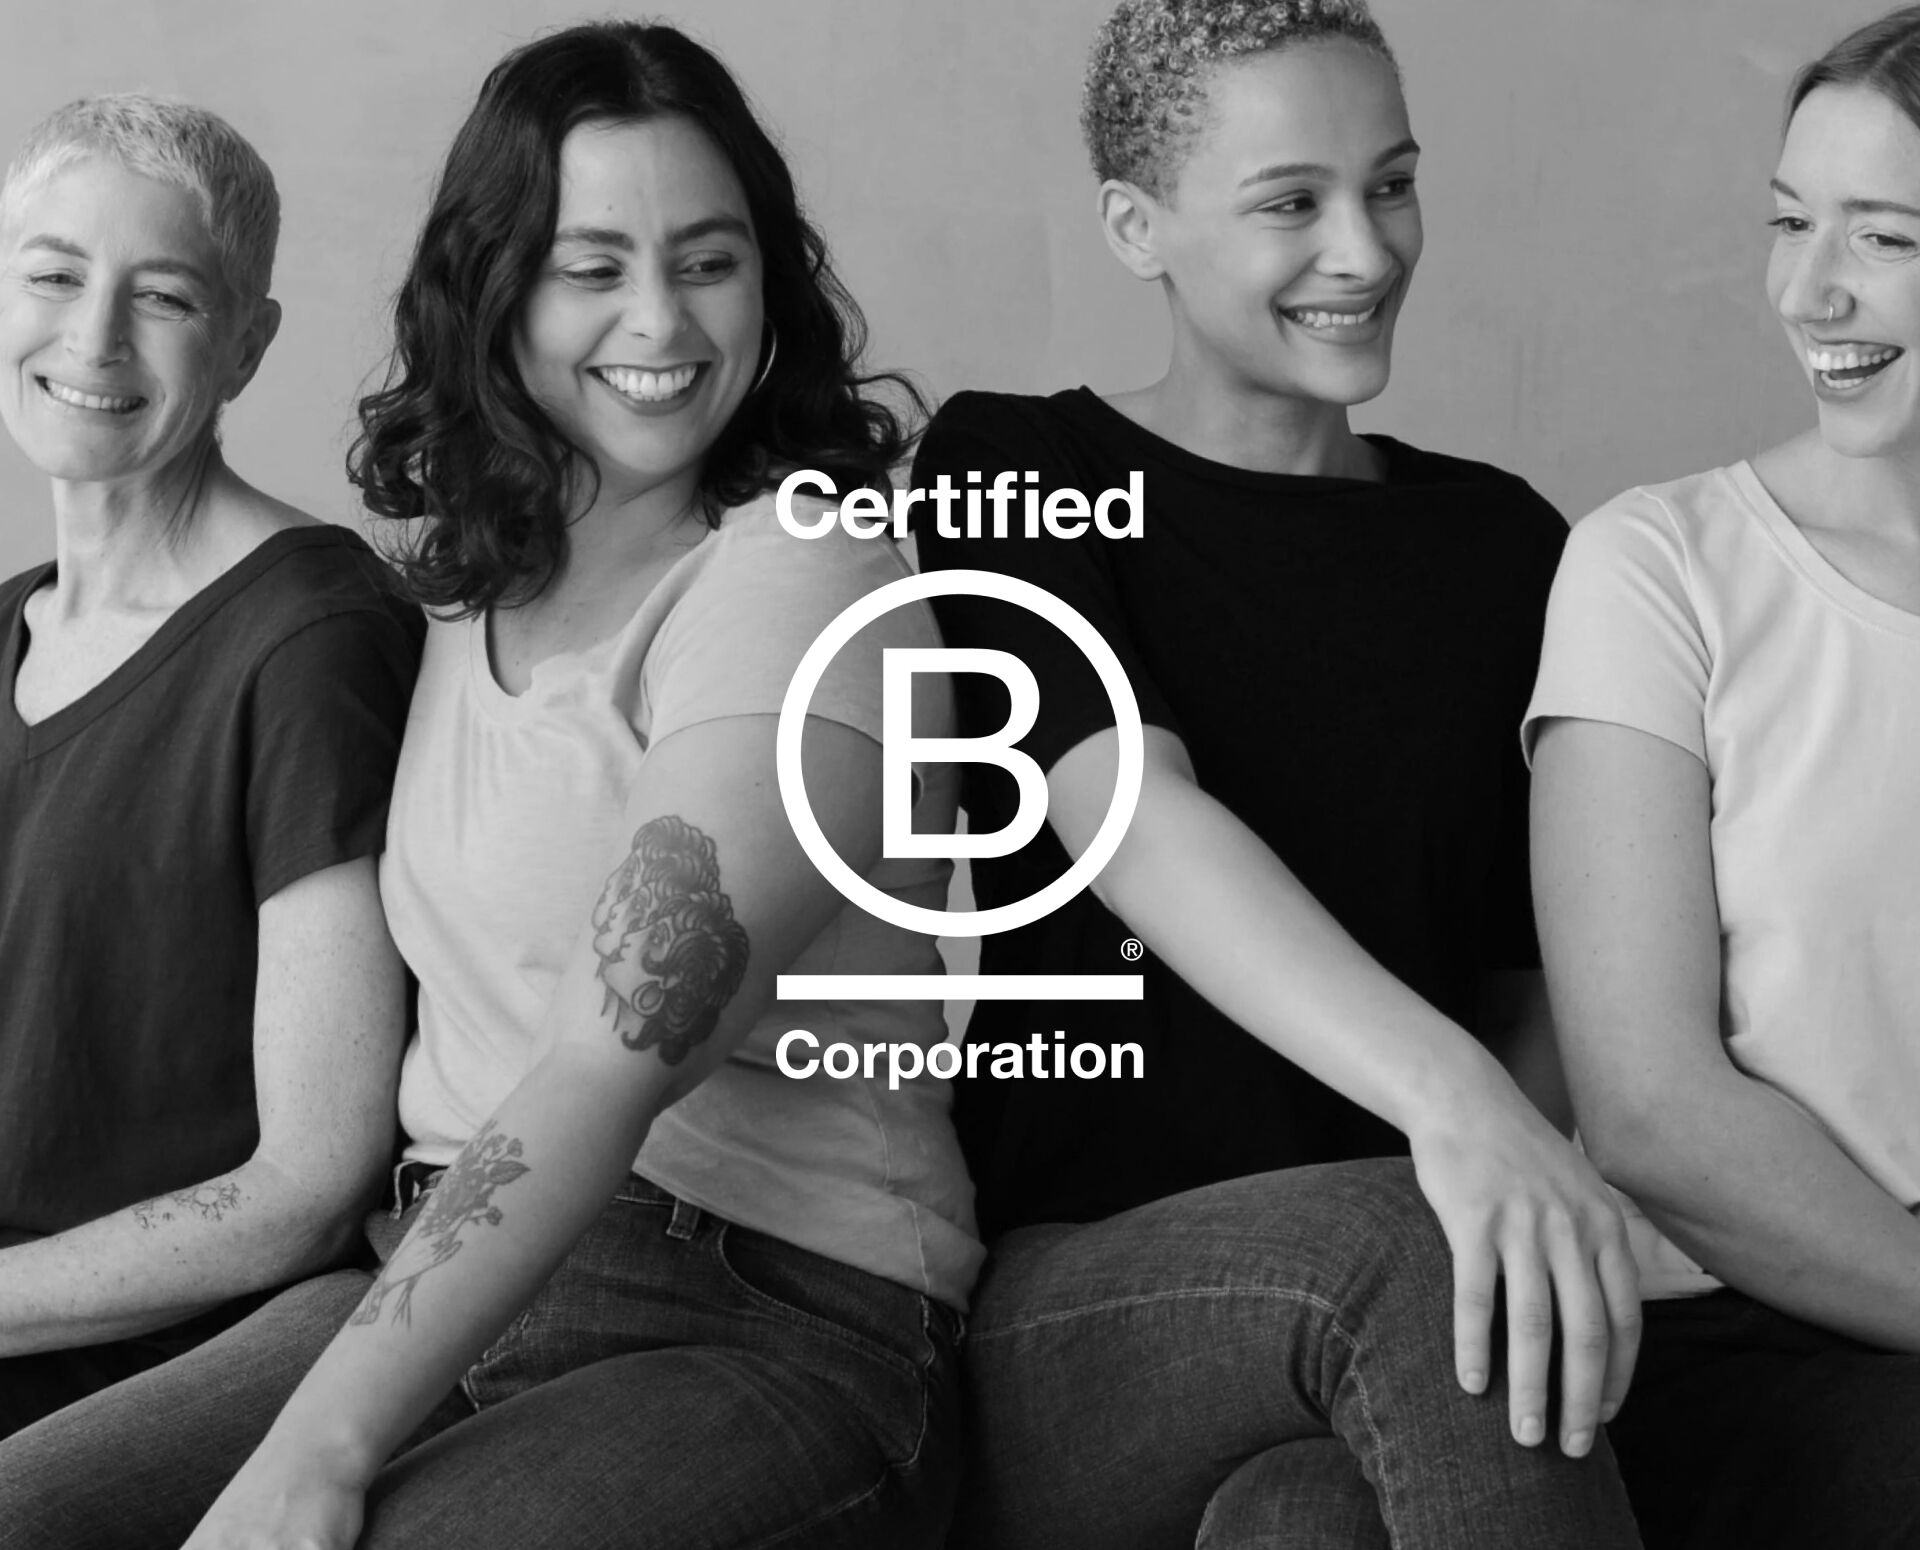 The Journal Celebrating B Corp Month